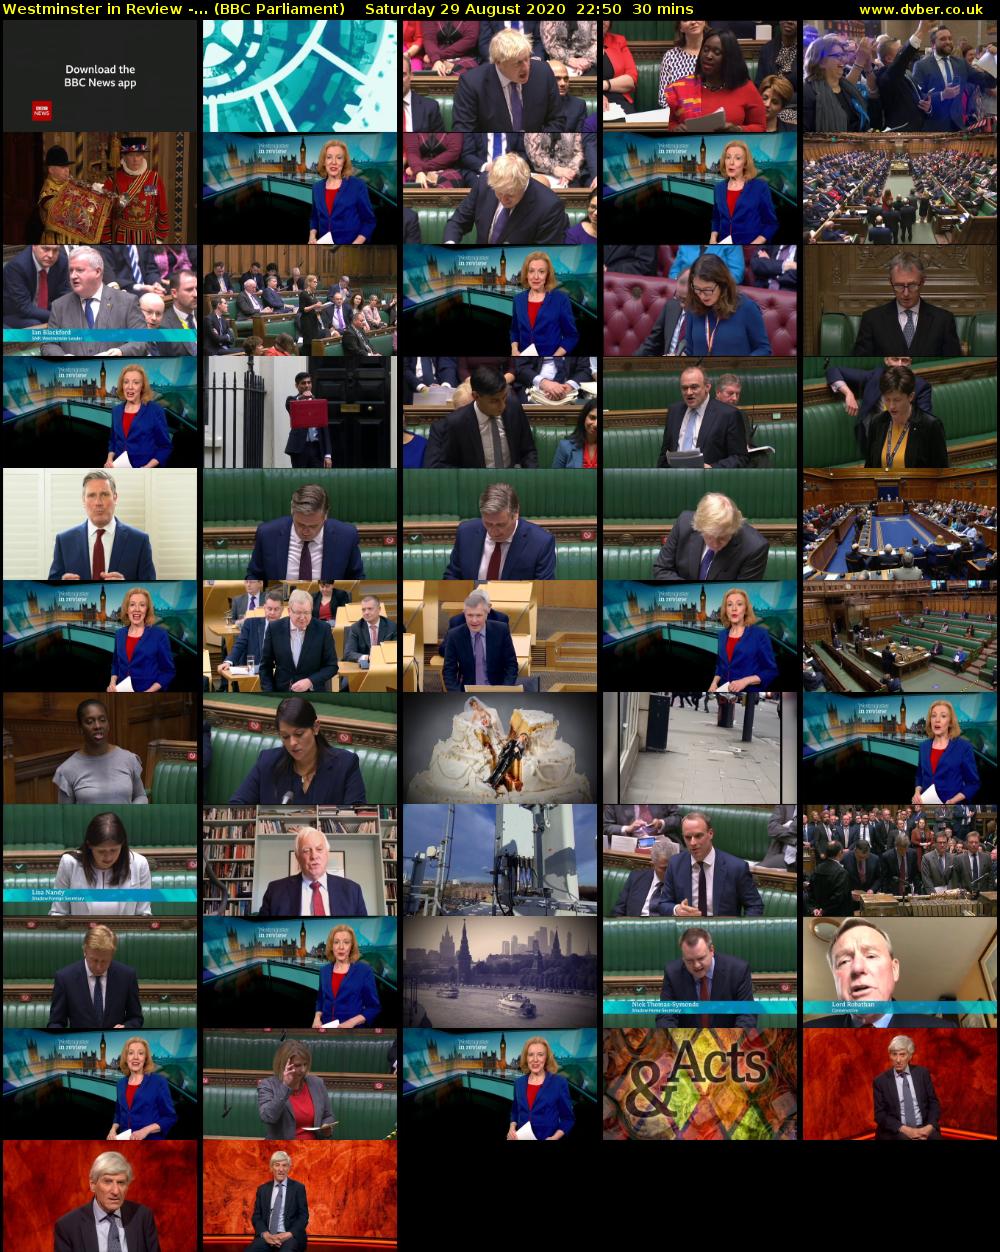 Westminster in Review -... (BBC Parliament) Saturday 29 August 2020 22:50 - 23:20